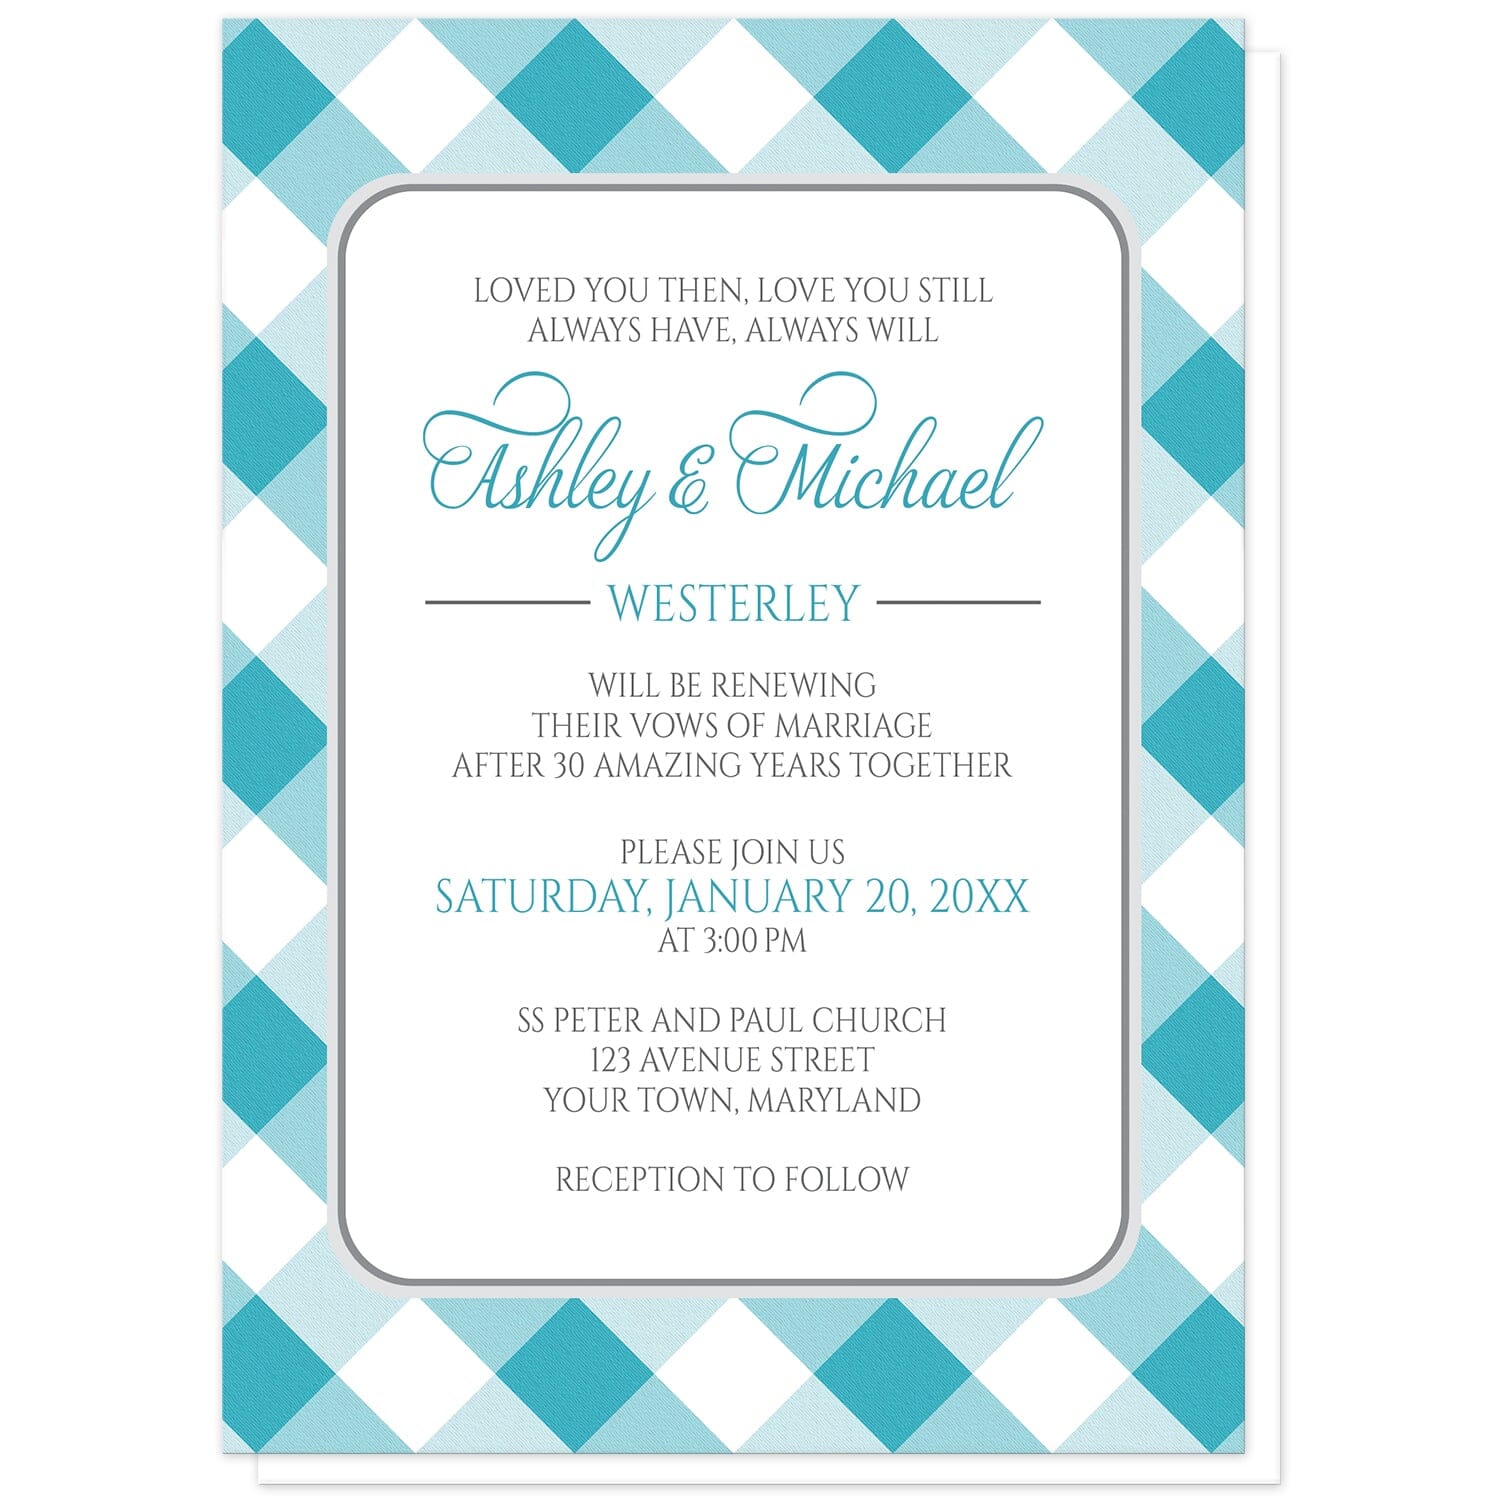 Turquoise Gingham Vow Renewal Invitations at Artistically Invited. Turquoise gingham vow renewal invitations with your personalized ceremony details custom printed in turquoise and gray inside a white rectangular area outlined in gray. The background design is a diagonal turquoise and white gingham pattern. 